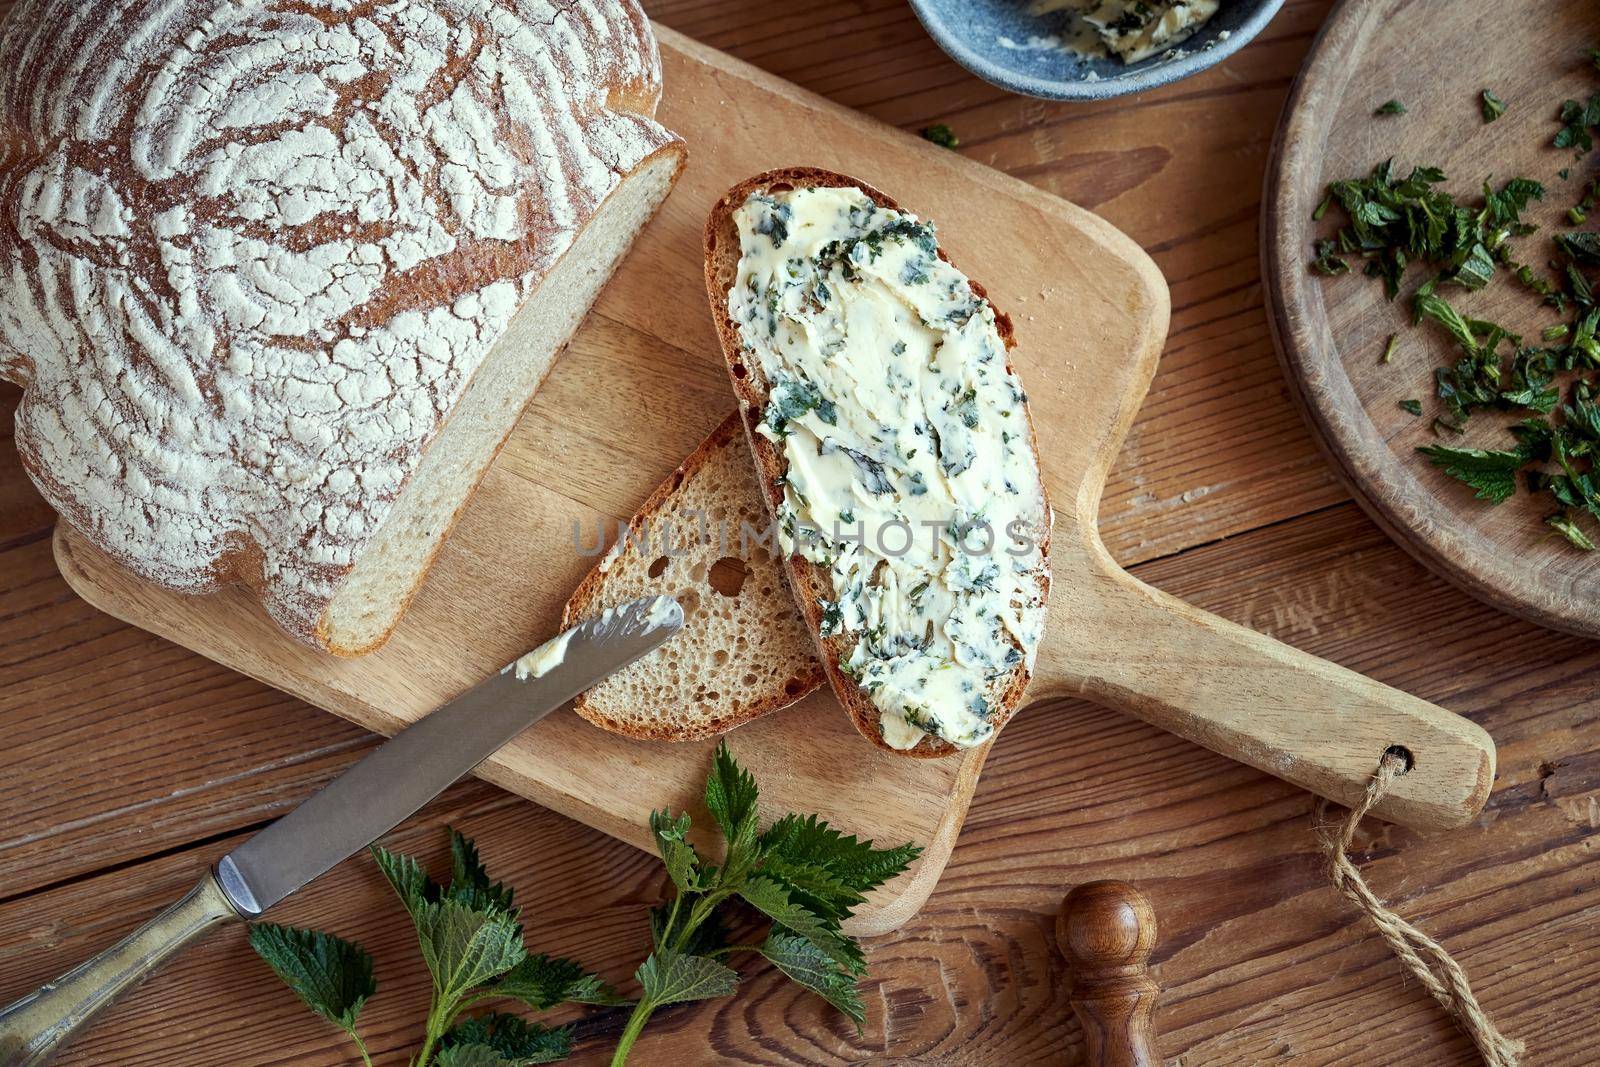 A slice of sourdough bread with herbal butter made from young nettles